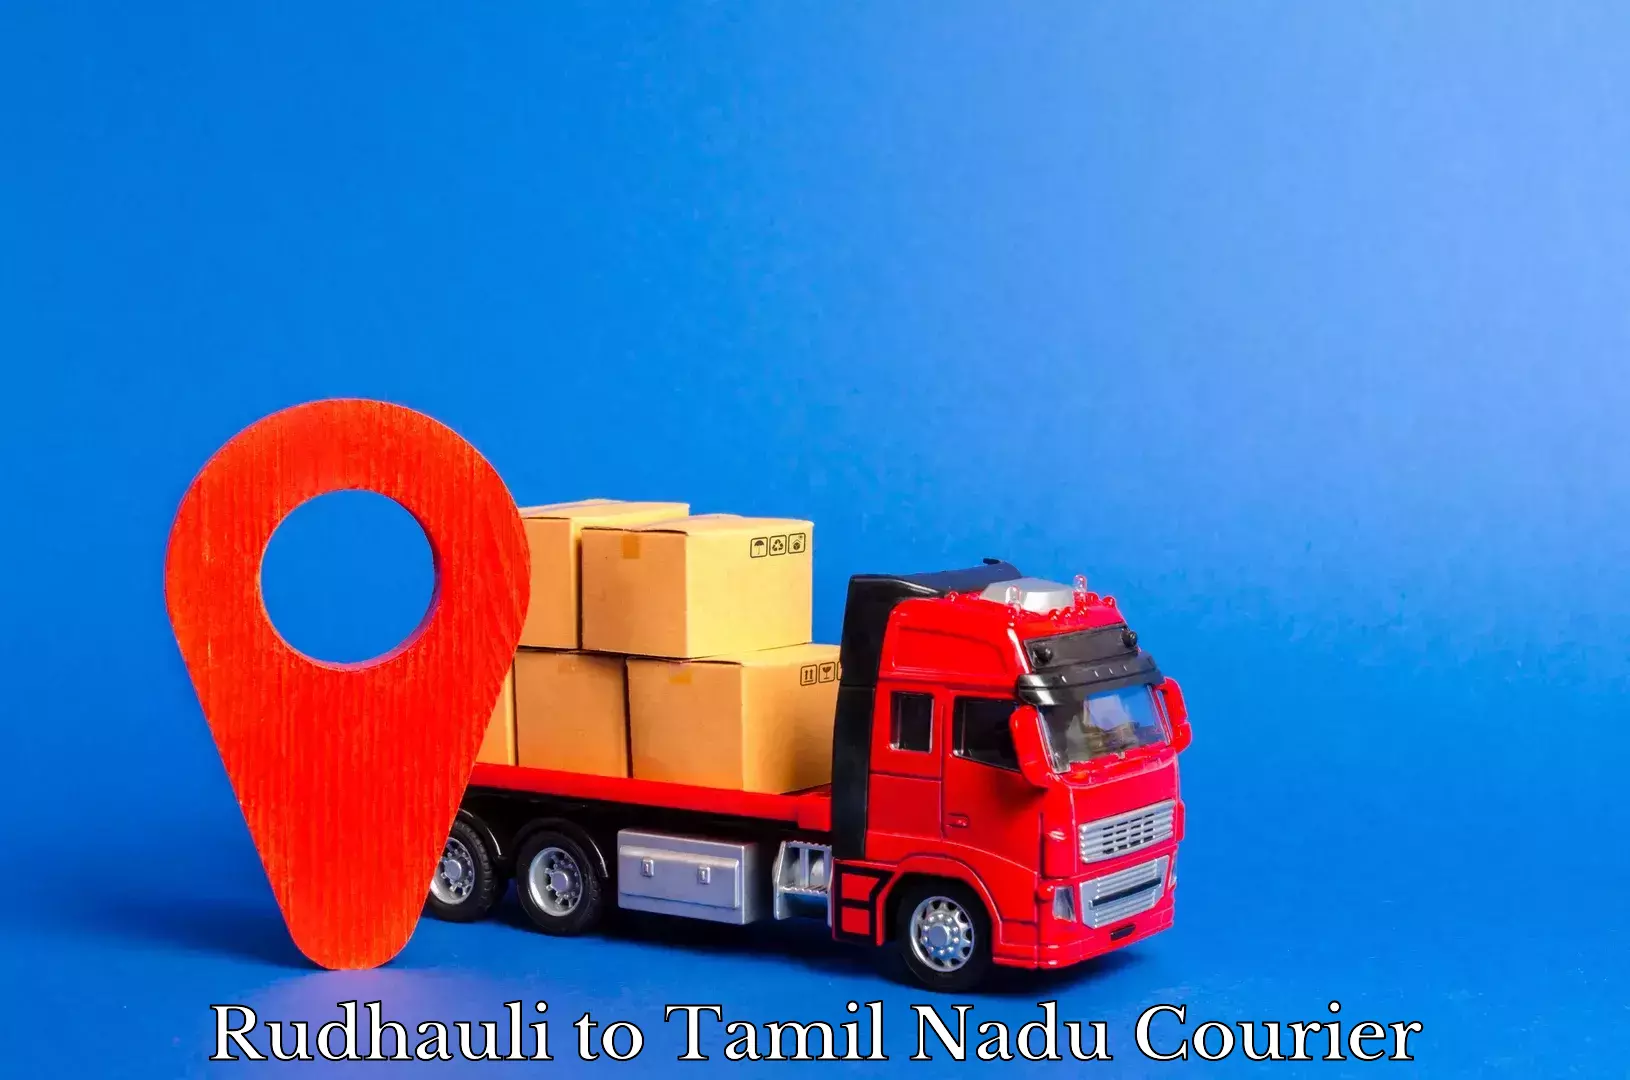 Same-day delivery solutions Rudhauli to Tamil Nadu